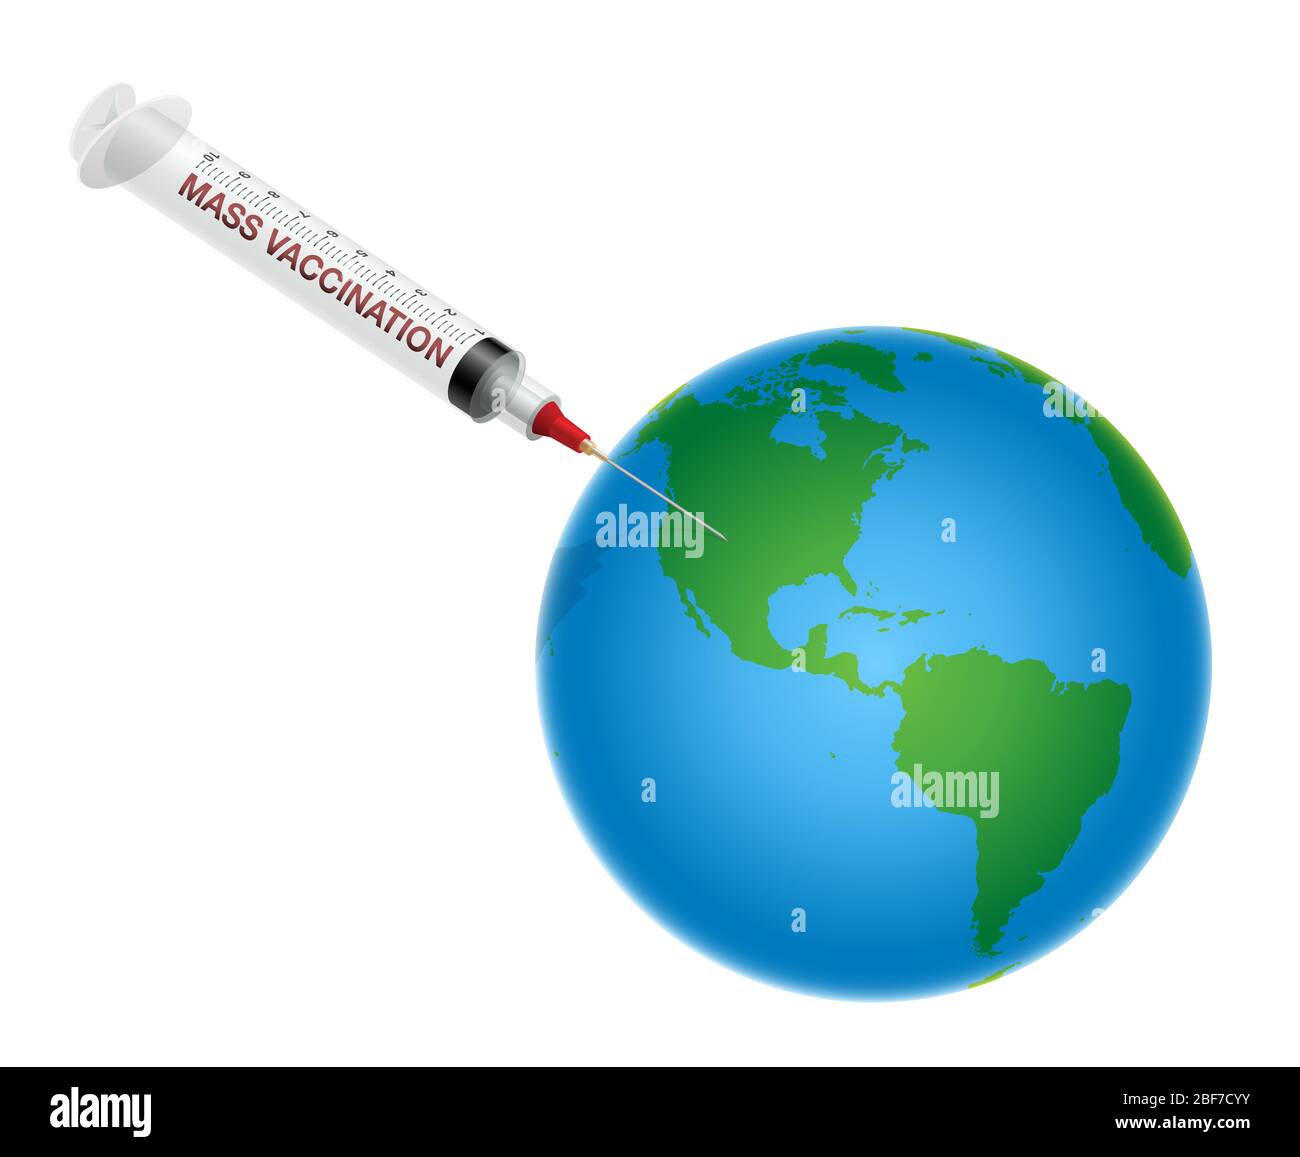 Syringe vaccinates planet earth. Symbol for mass vaccination and  global coronavirus immunization campaign of the pharma industry. Stock Photo